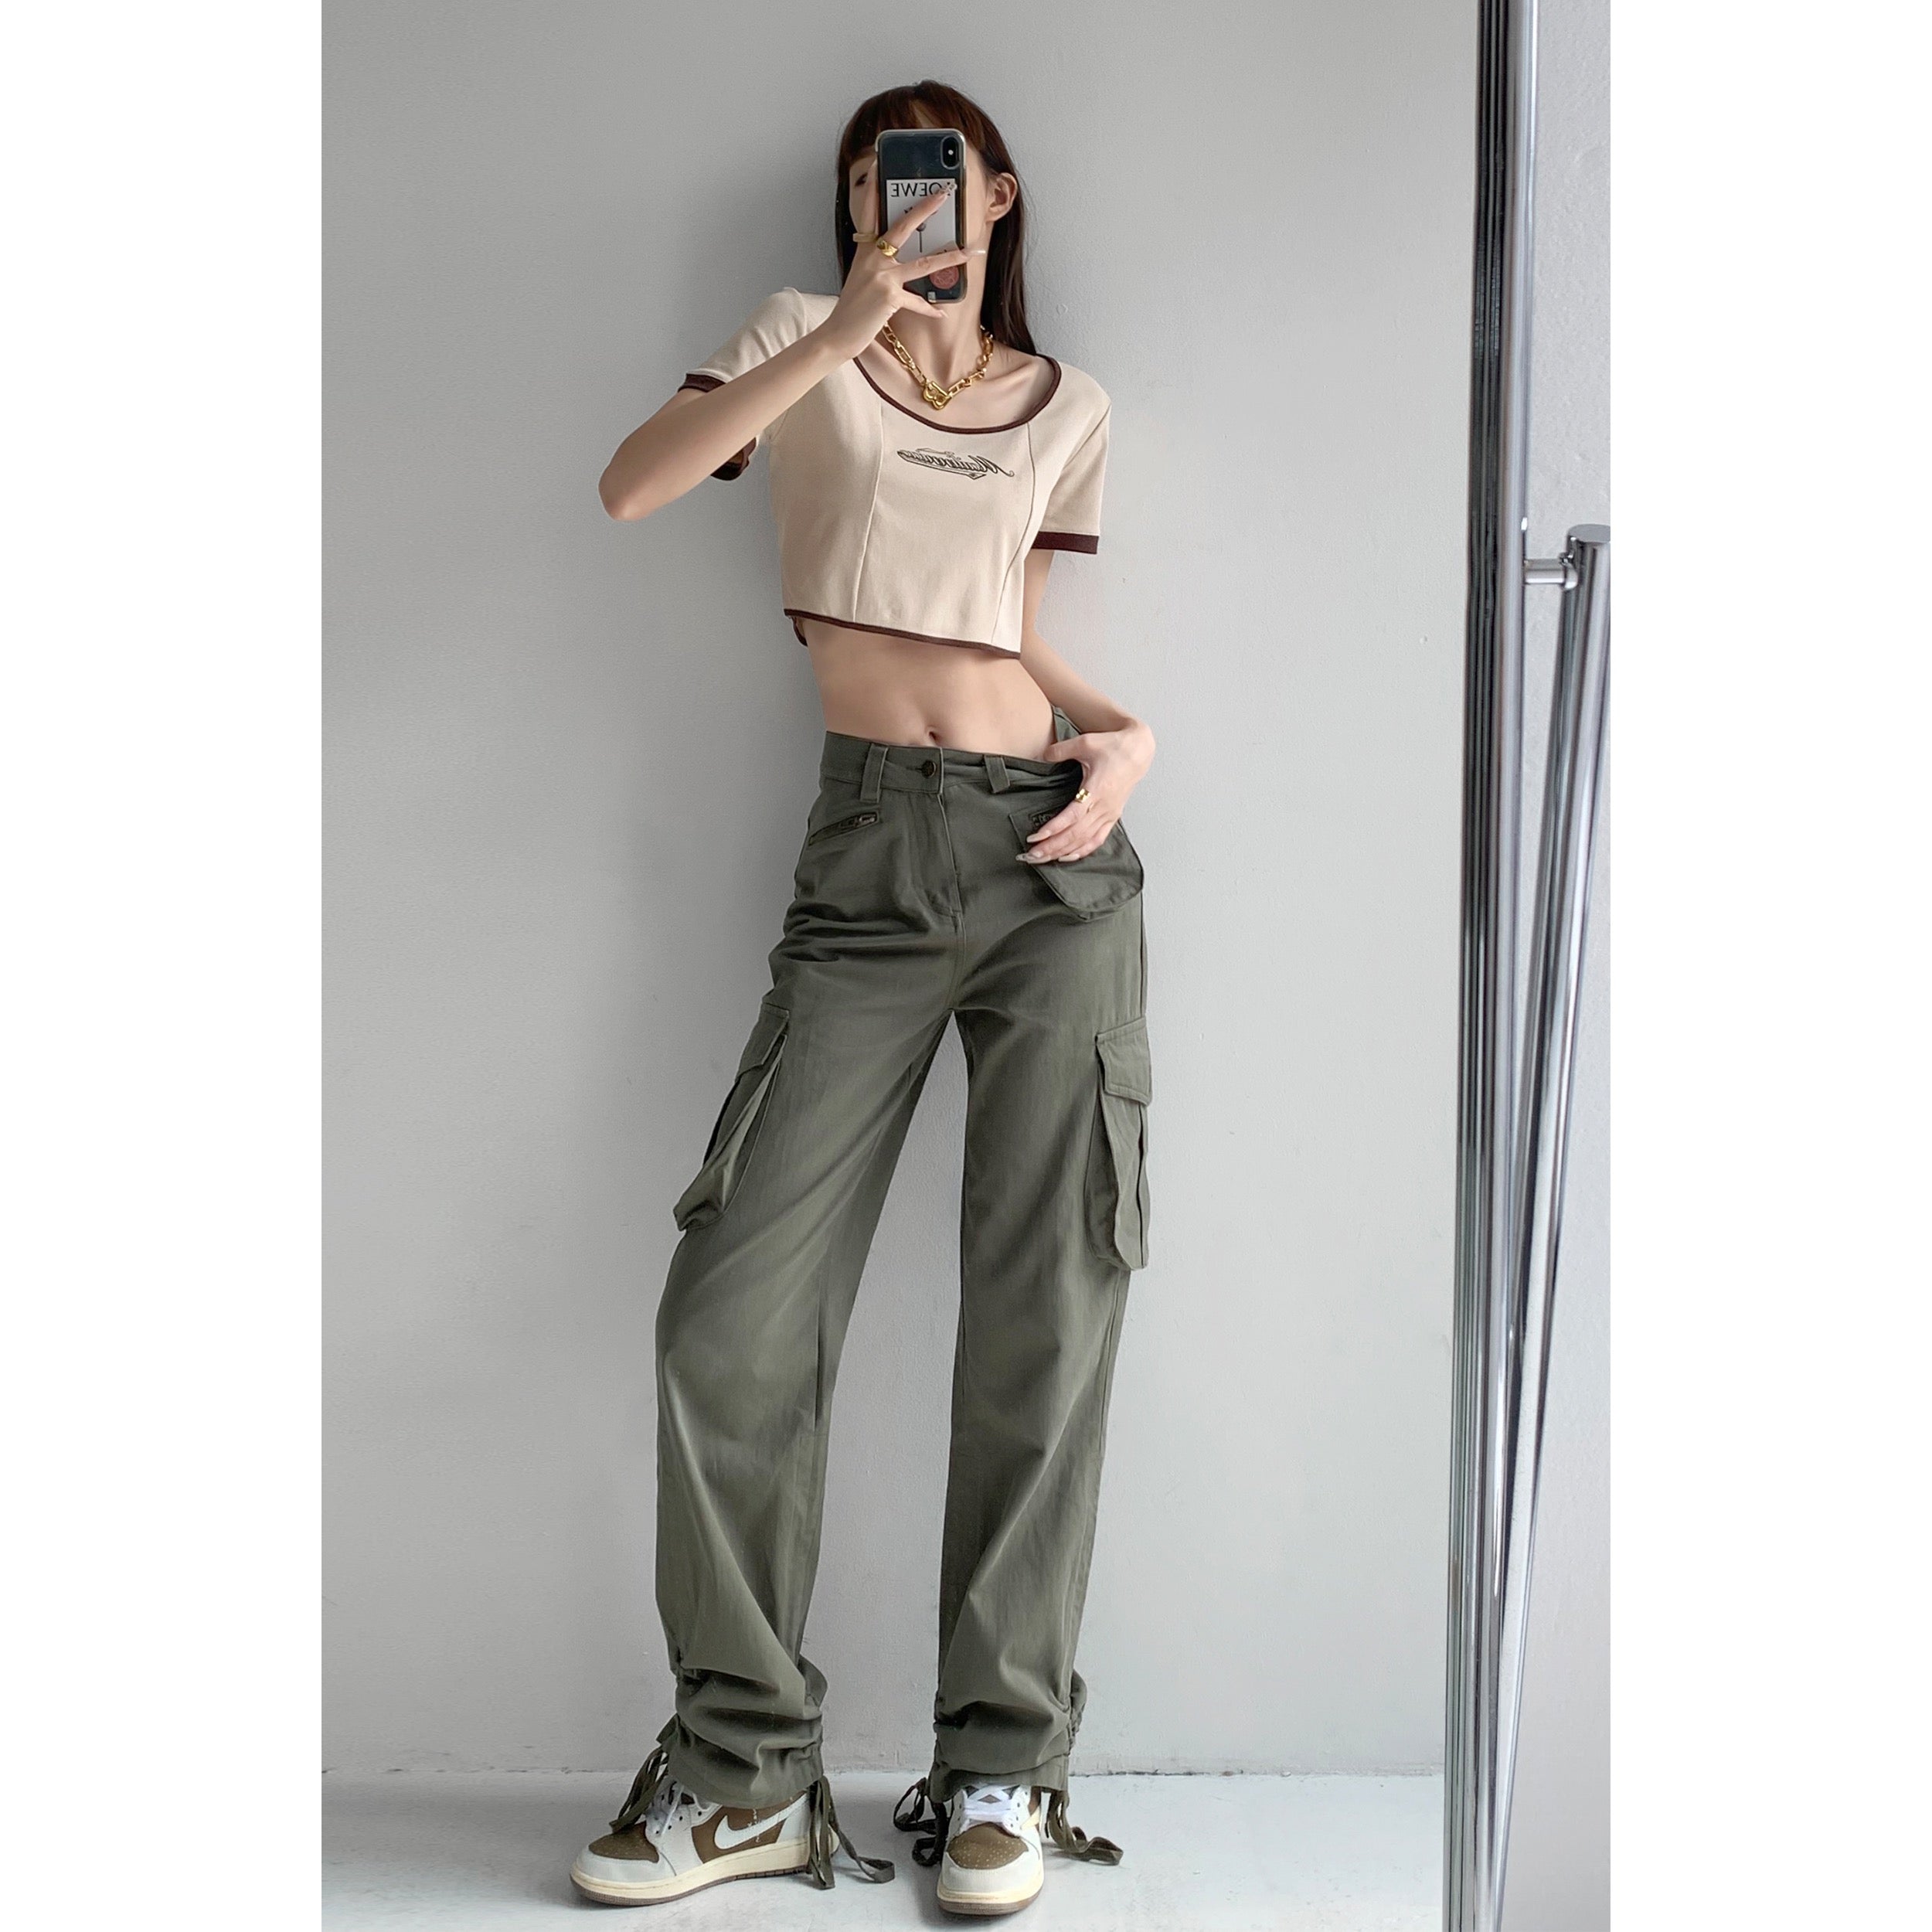 High Waist Cargo Pants for Women - Stylish and Functional